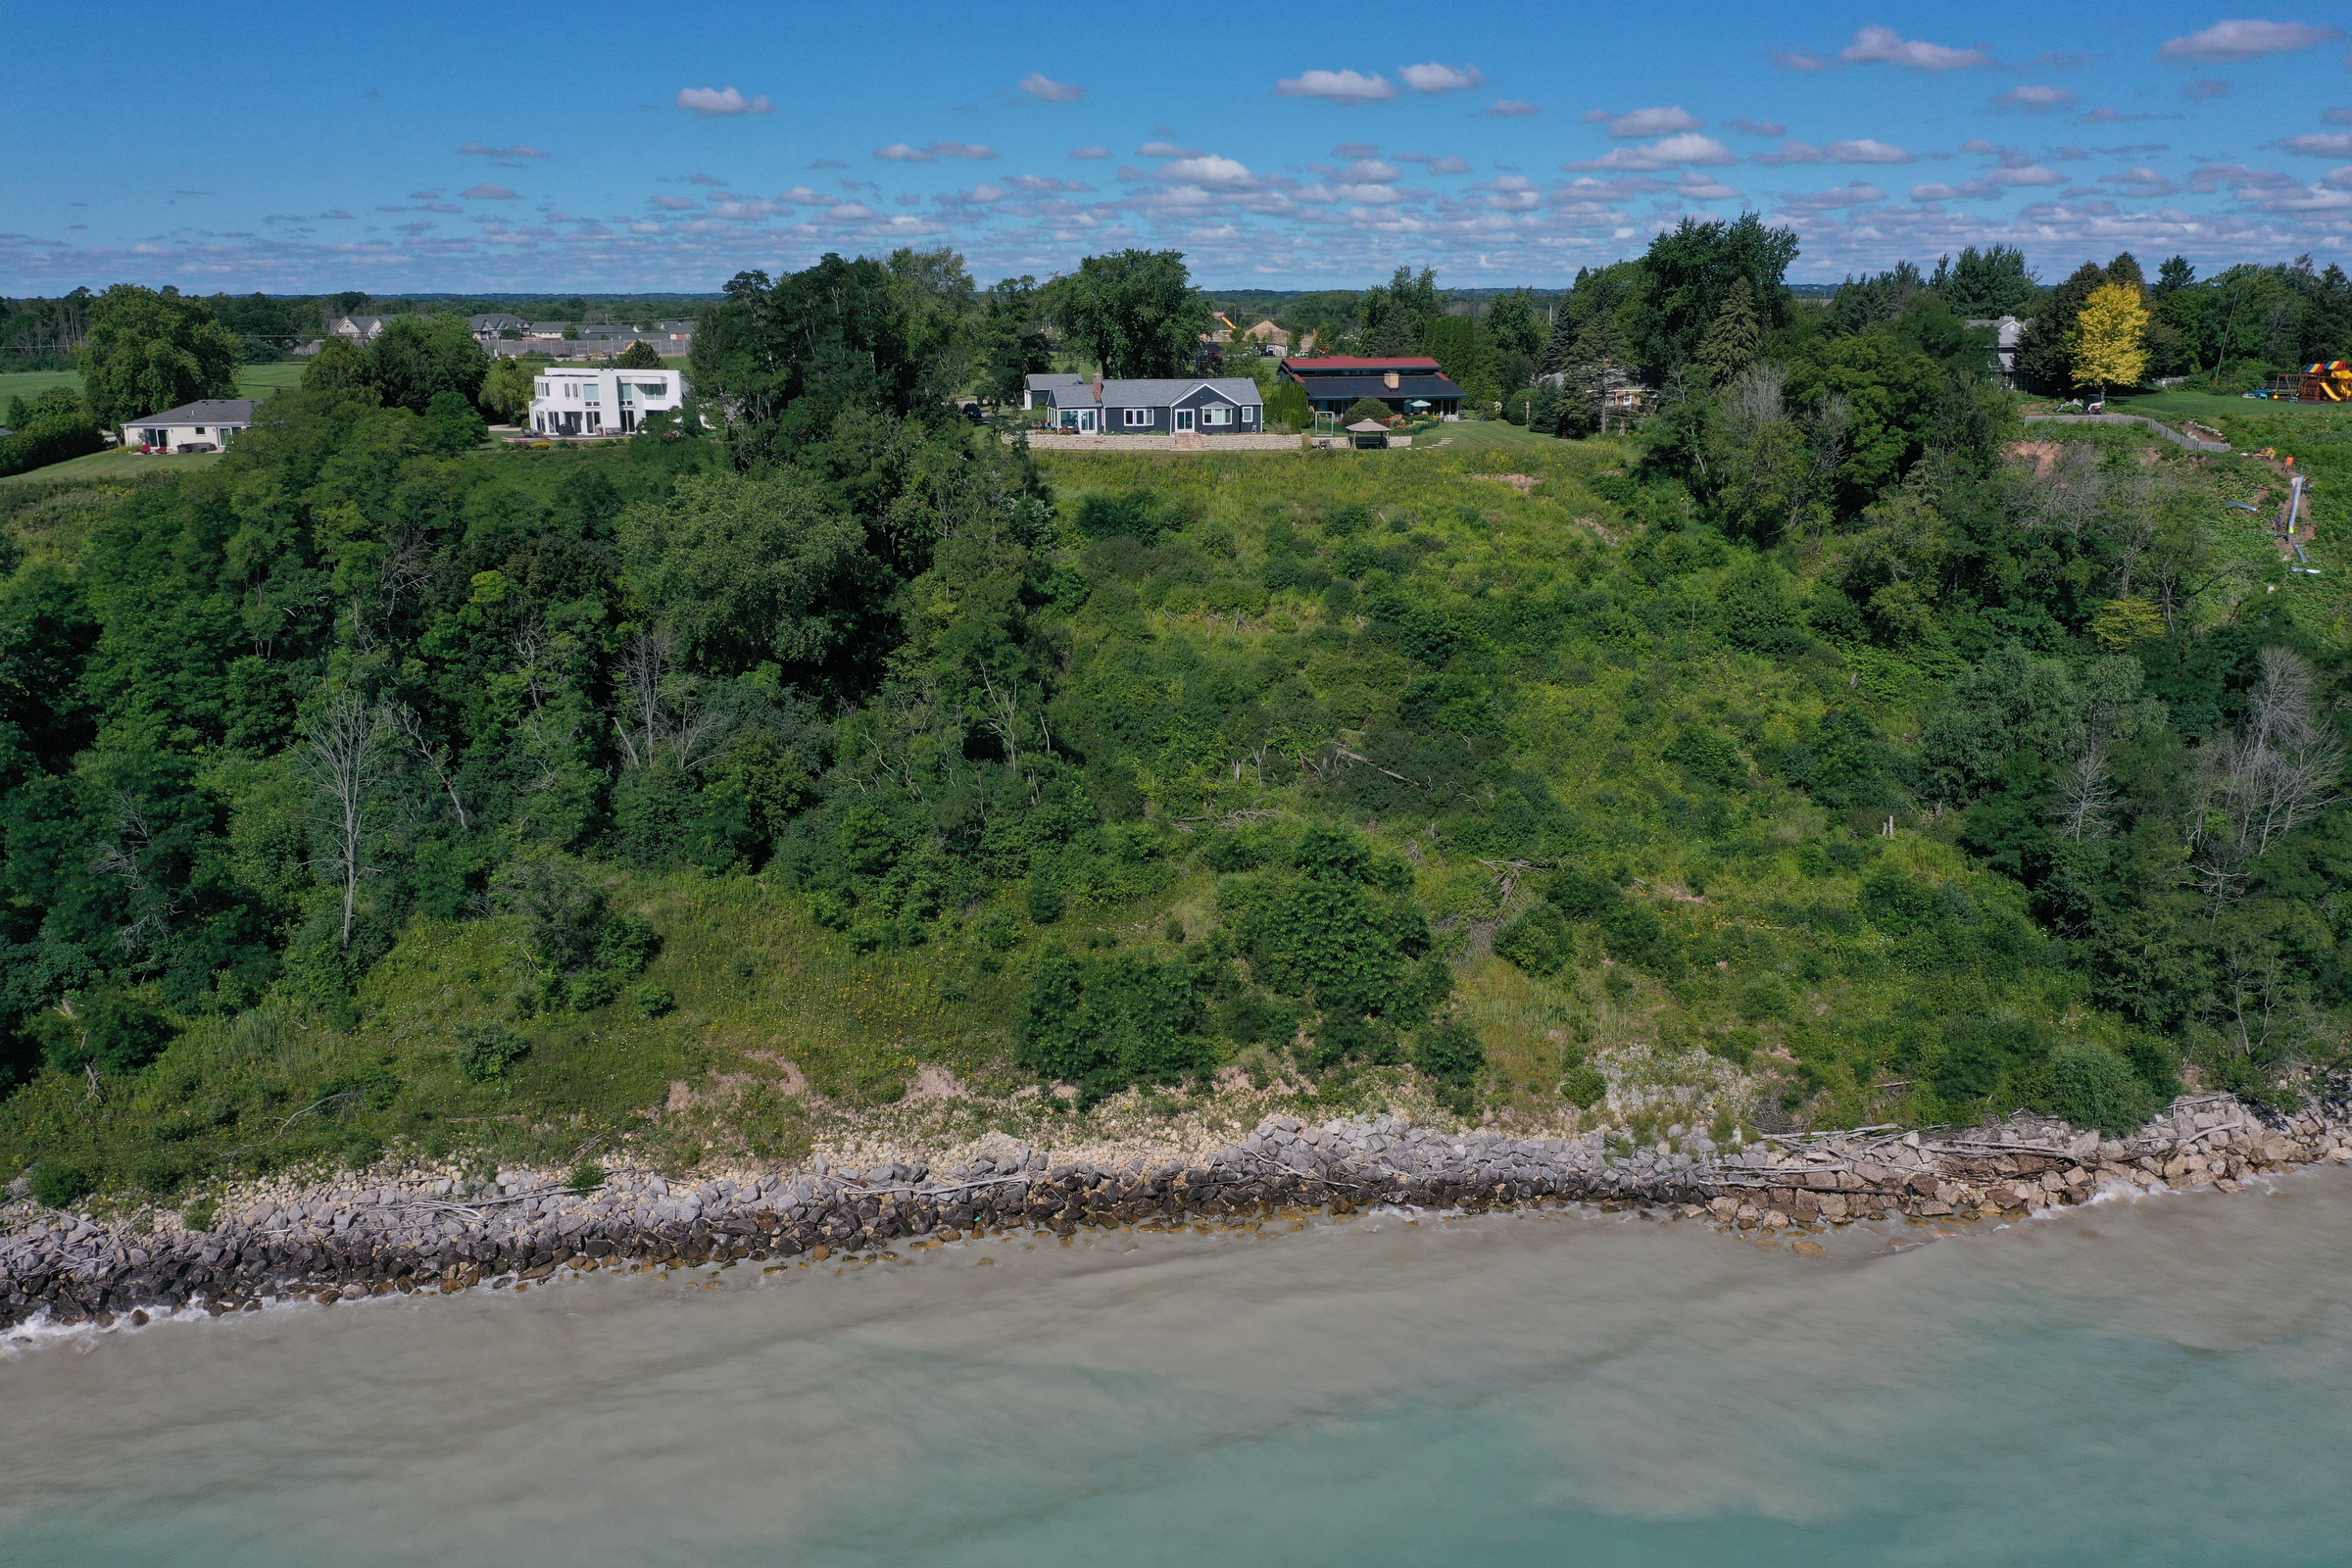 The house belonging to David Spector (blue house, center) is seen on a 120-foot bluff in Mequon, Wis.